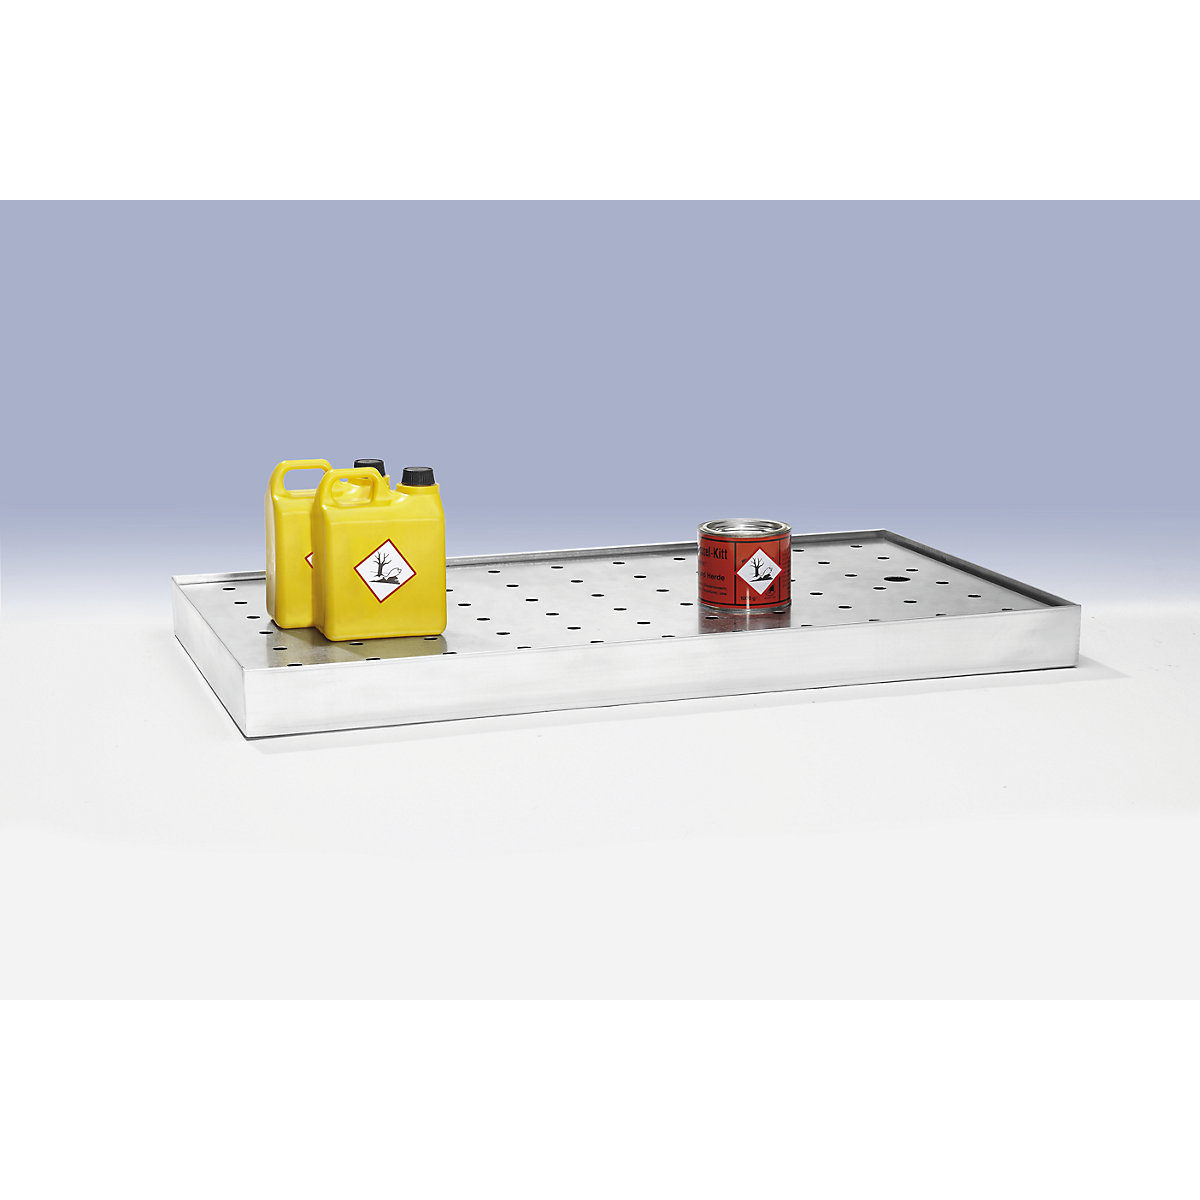 Perforated metal cover for tray shelf - eurokraft pro